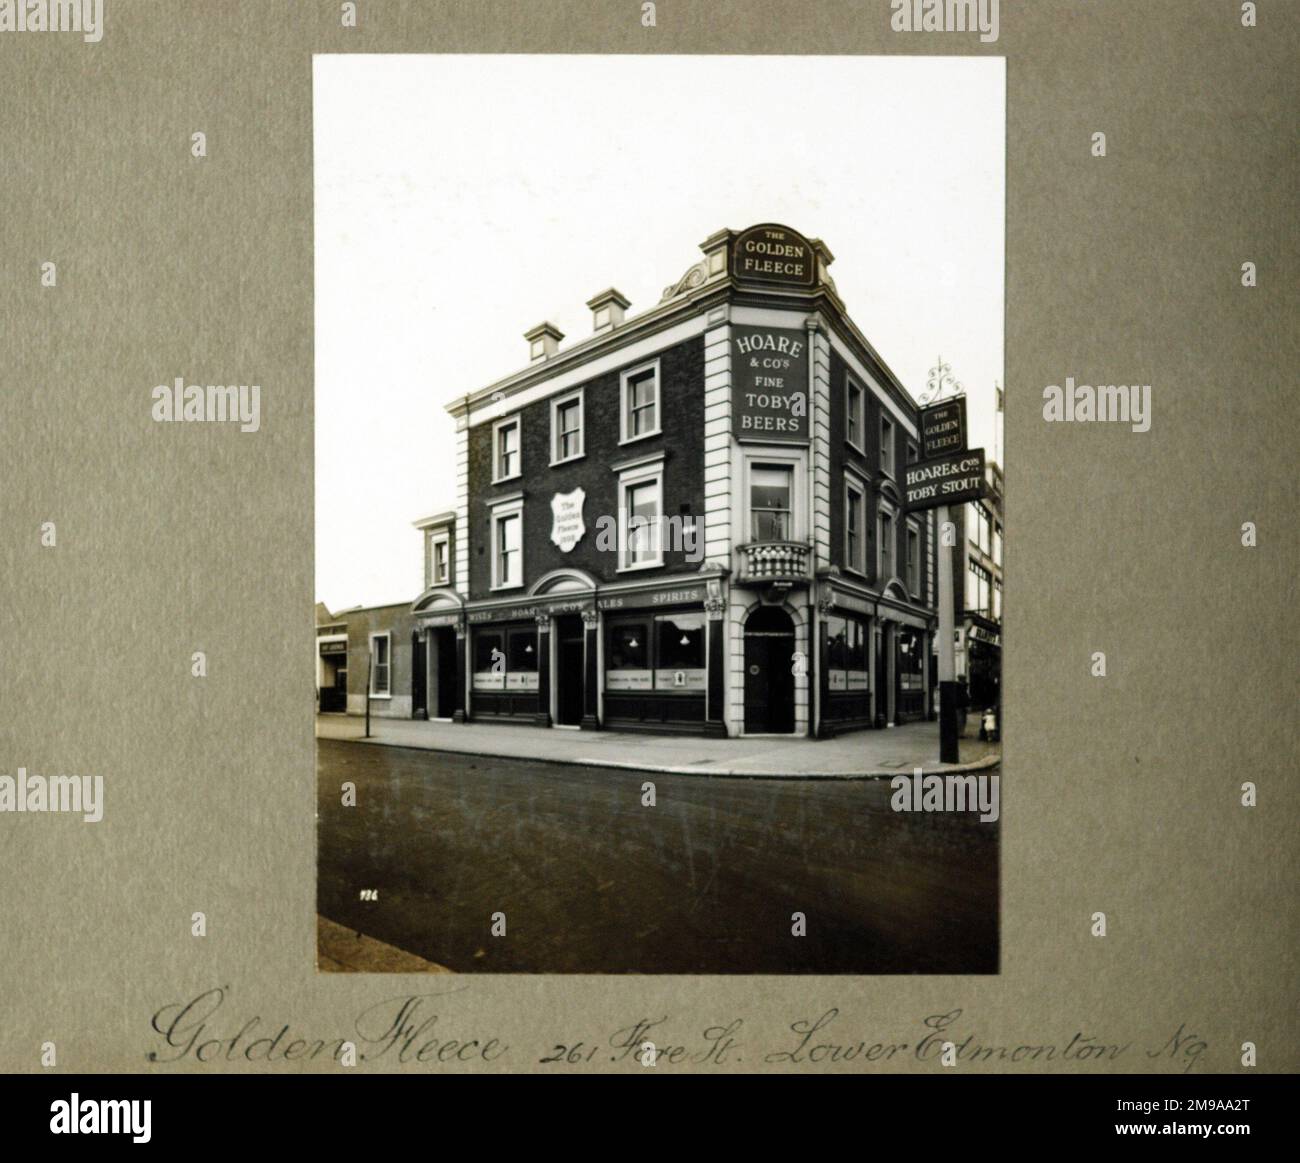 Photograph of Golden Fleece PH, Edmonton, London. The main side of the  print (shown here) depicts: Corner on view of the pub. The back of the  print (available on request) details: Nothing